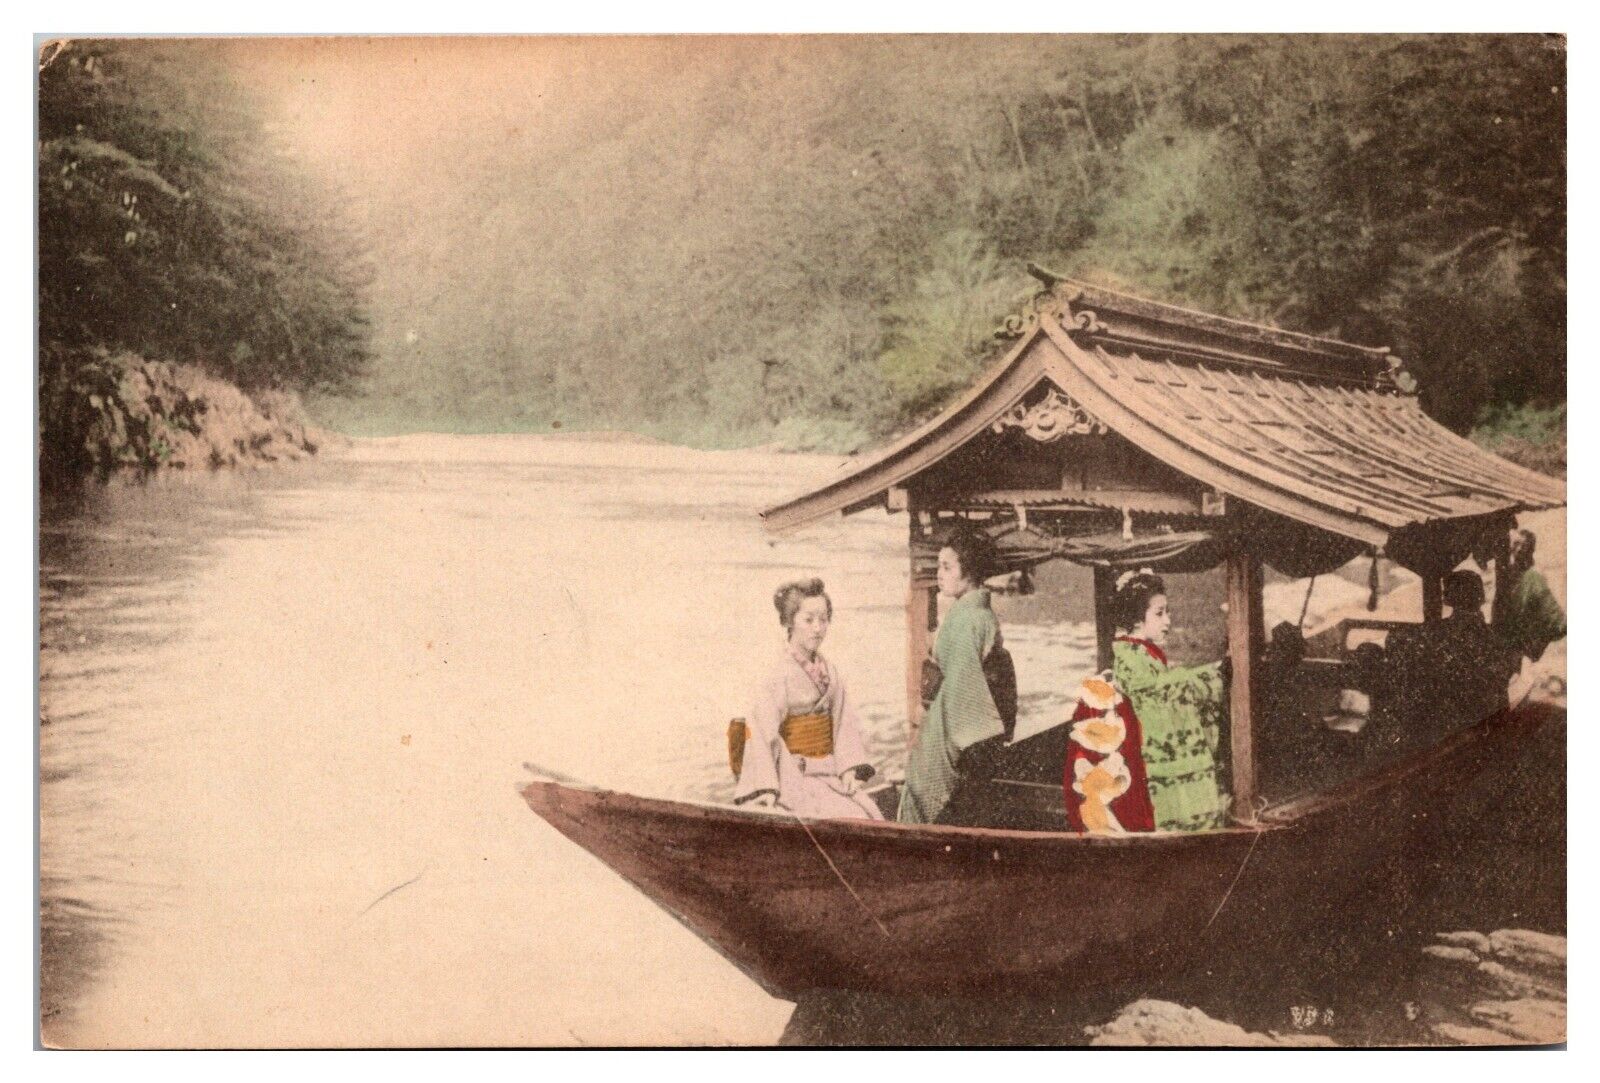 ANTQ Japanese Women in Traditional Dress on a Boat, Japan, Postcard